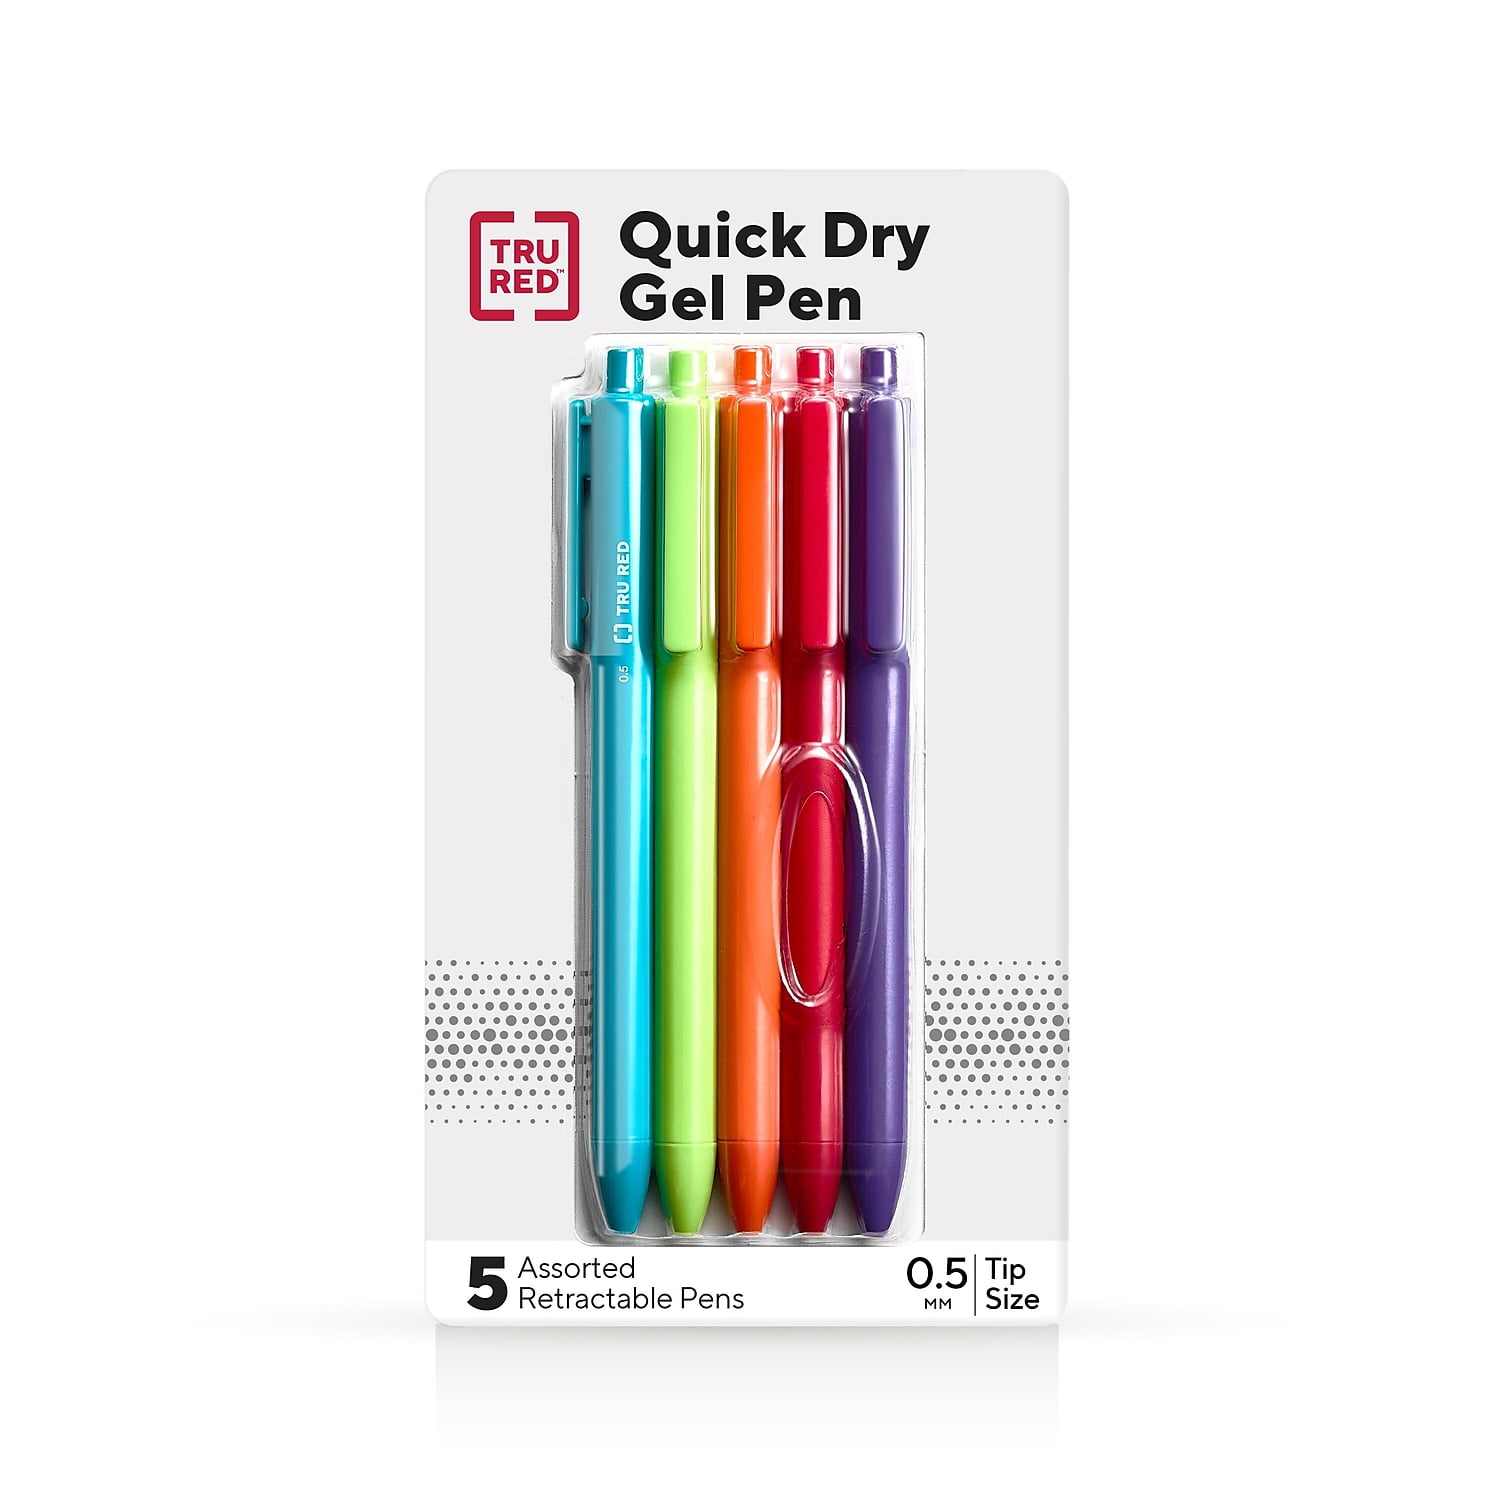 PAPERAGE Gel Pen with Retractable Extra Fine Point (0.5mm), 20 Pack, Colored Pens for Bullet Style Journals, Notebooks, Writing